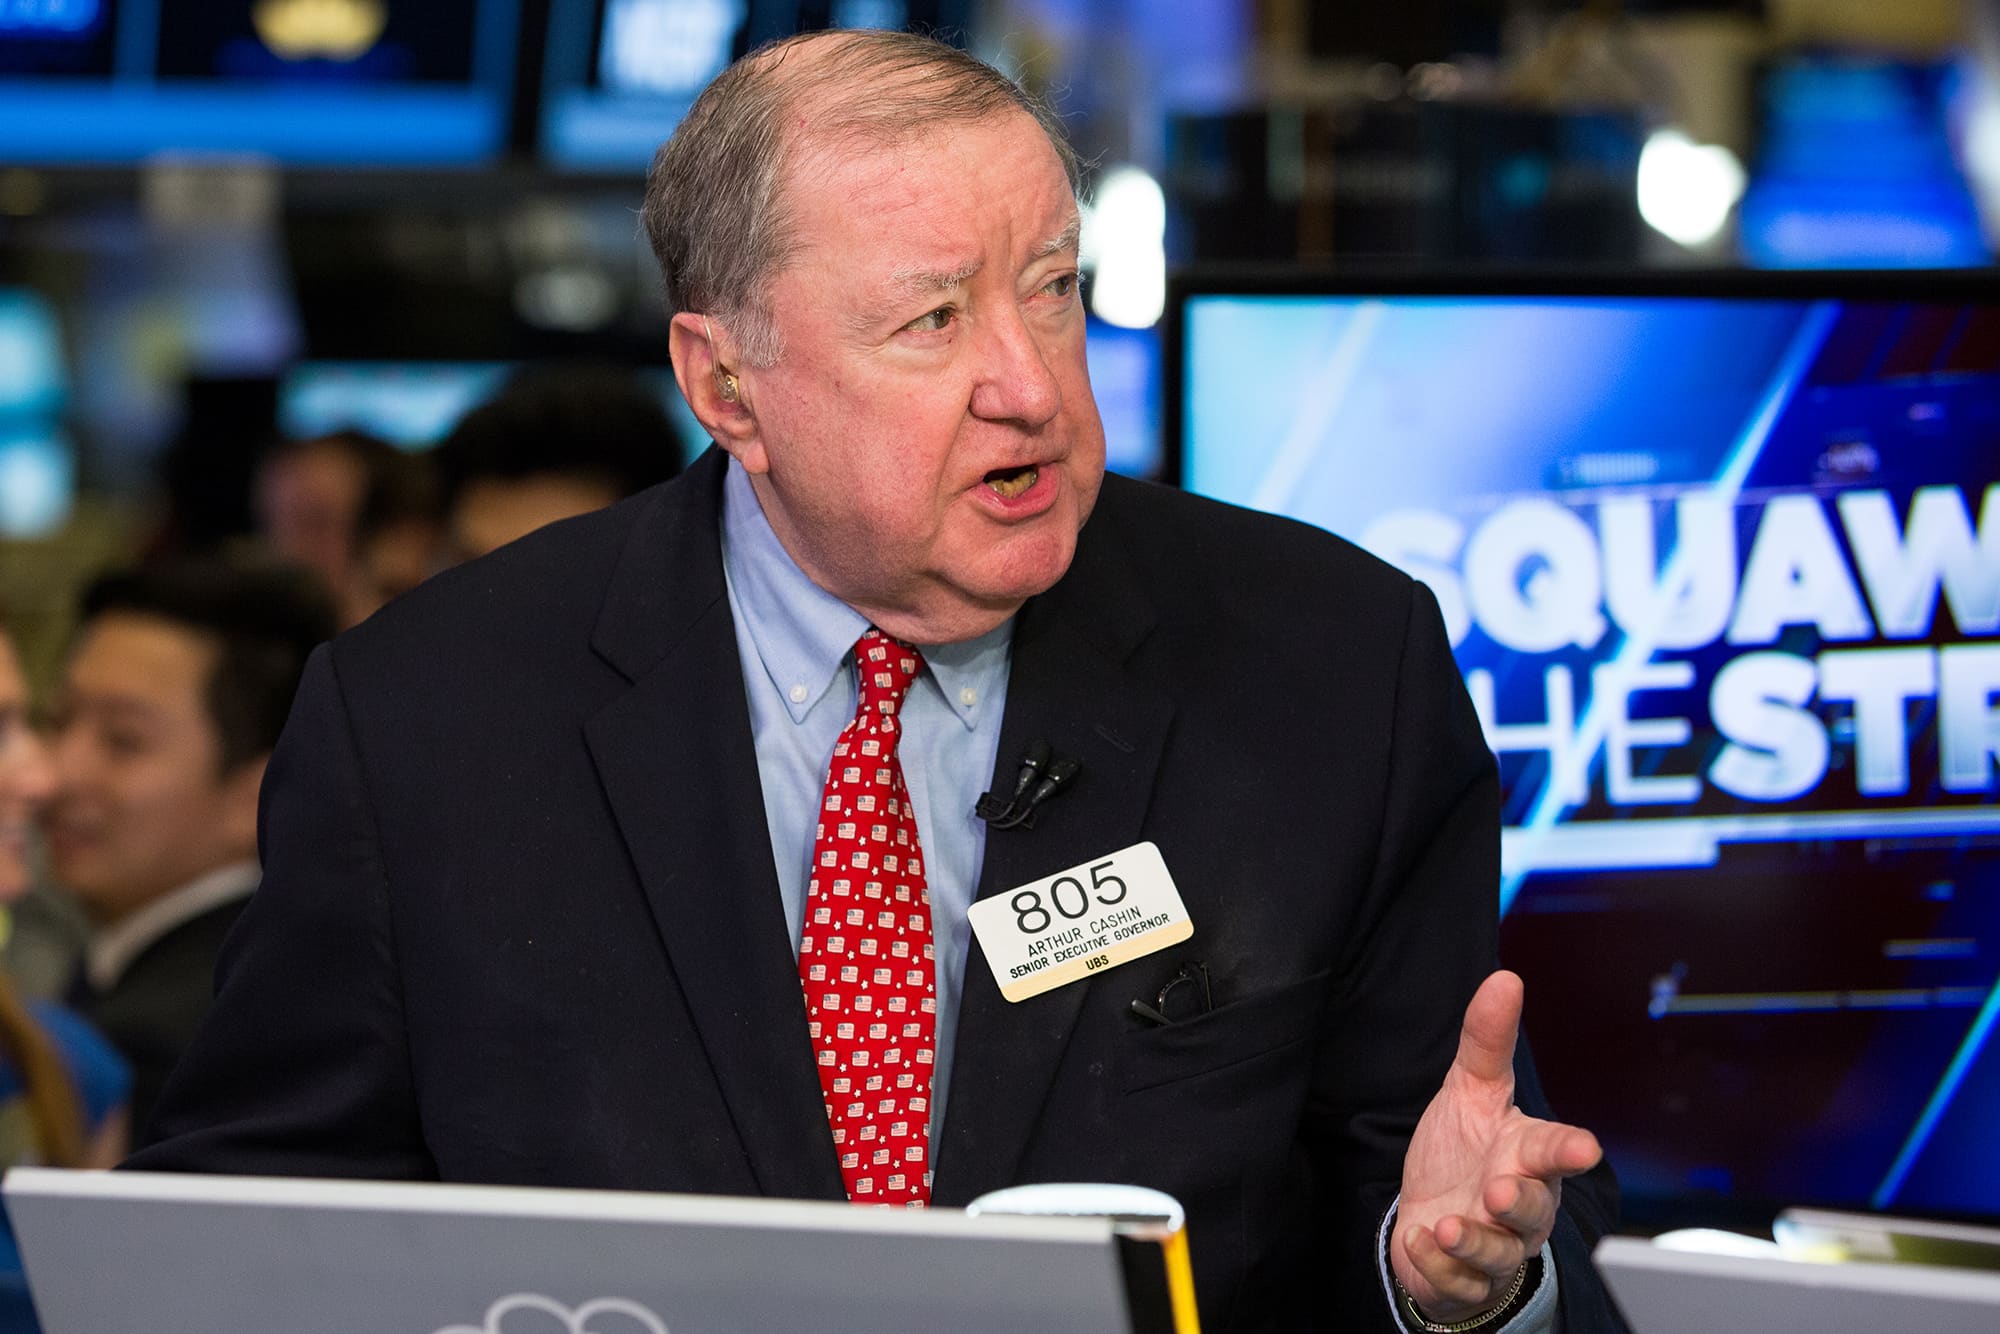 These are key levels that UBS's Art Cashin will be watching as the January rally unfolds